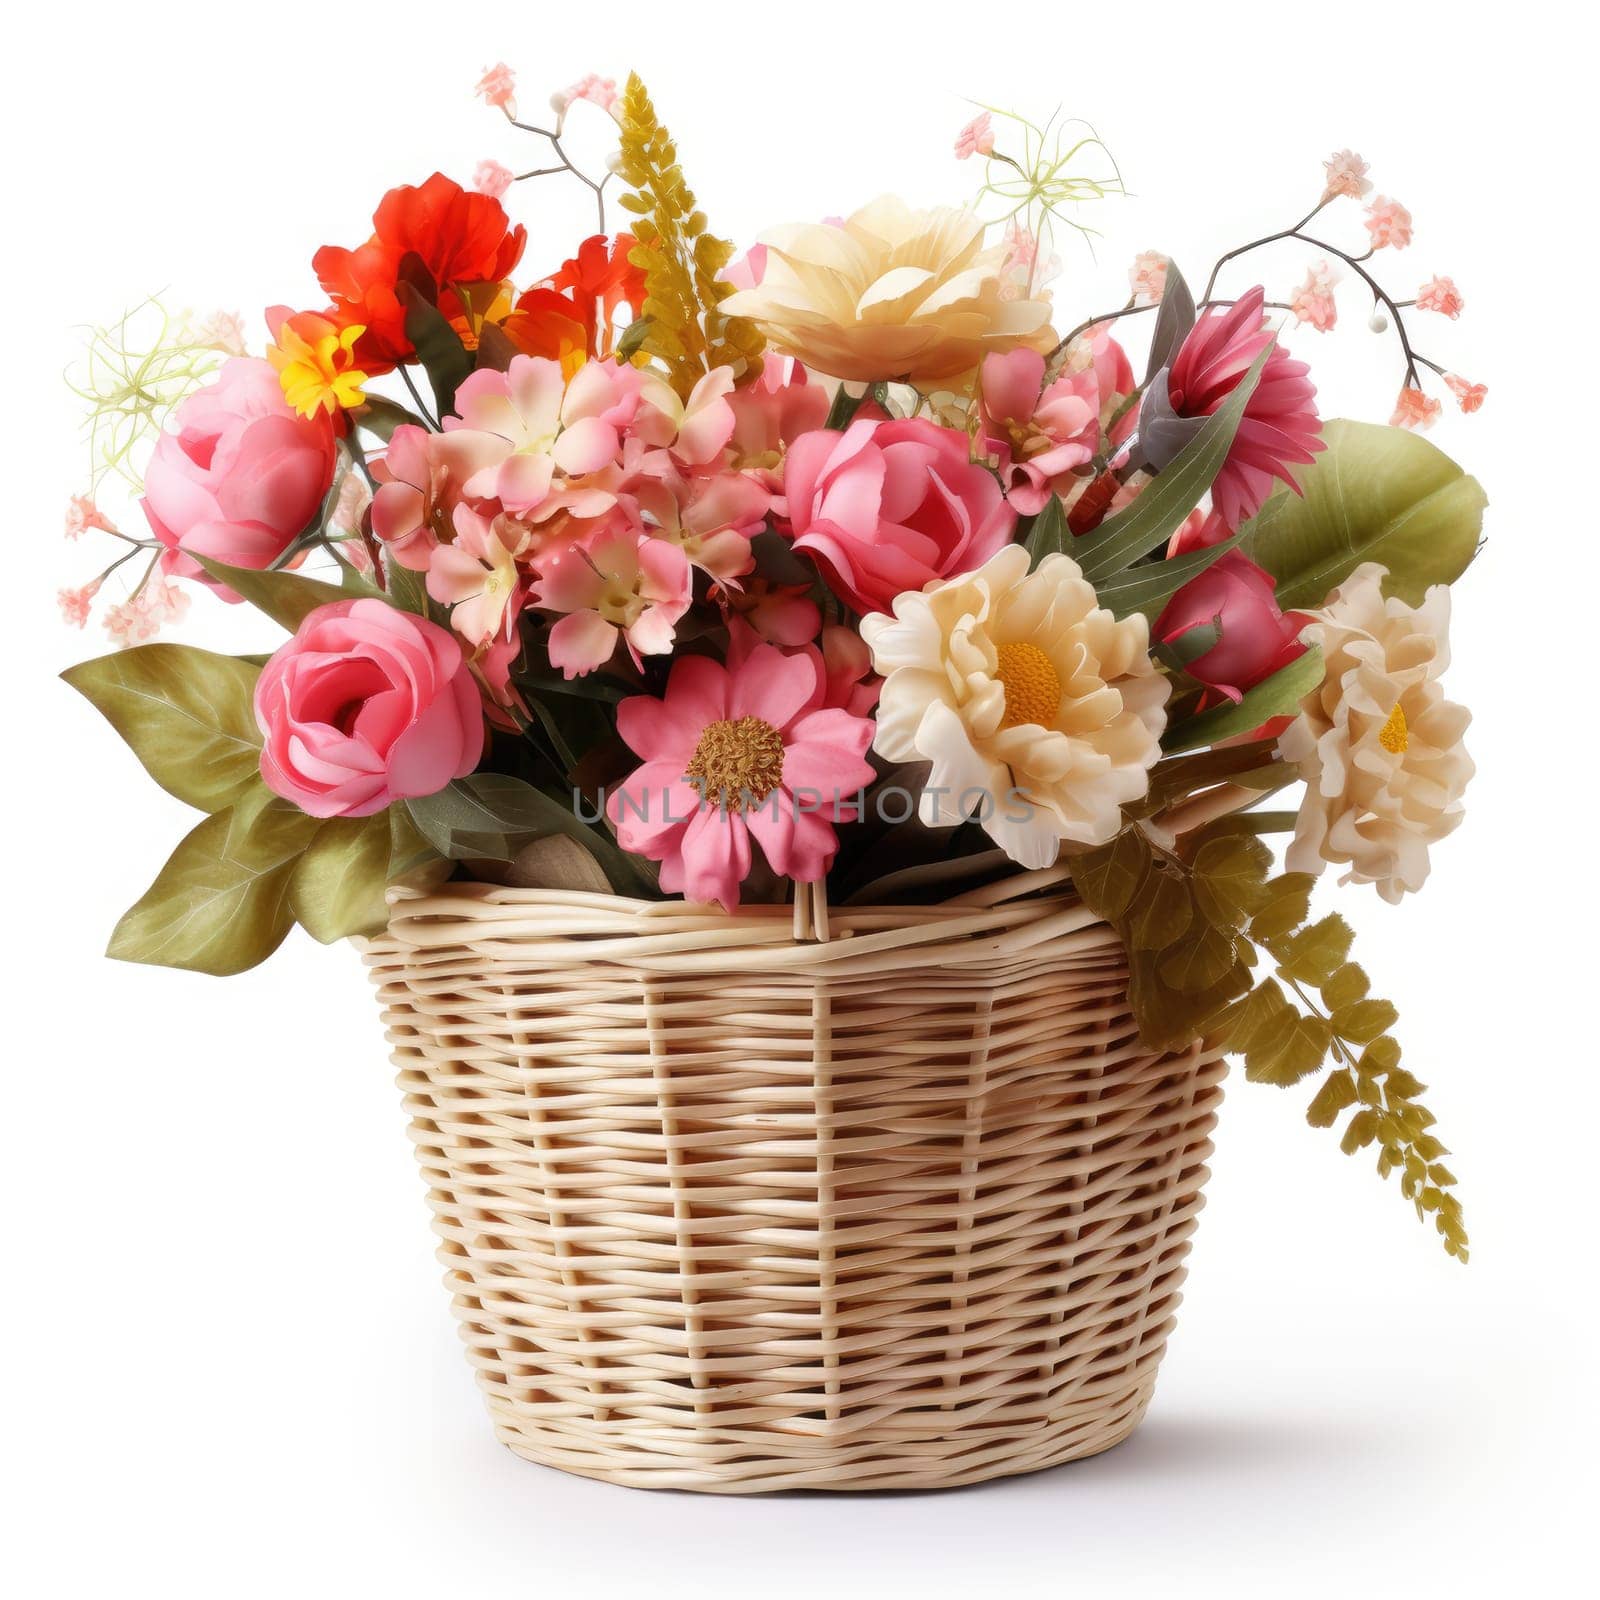 Wicker basket with beautiful spring flowers on white background by natali_brill